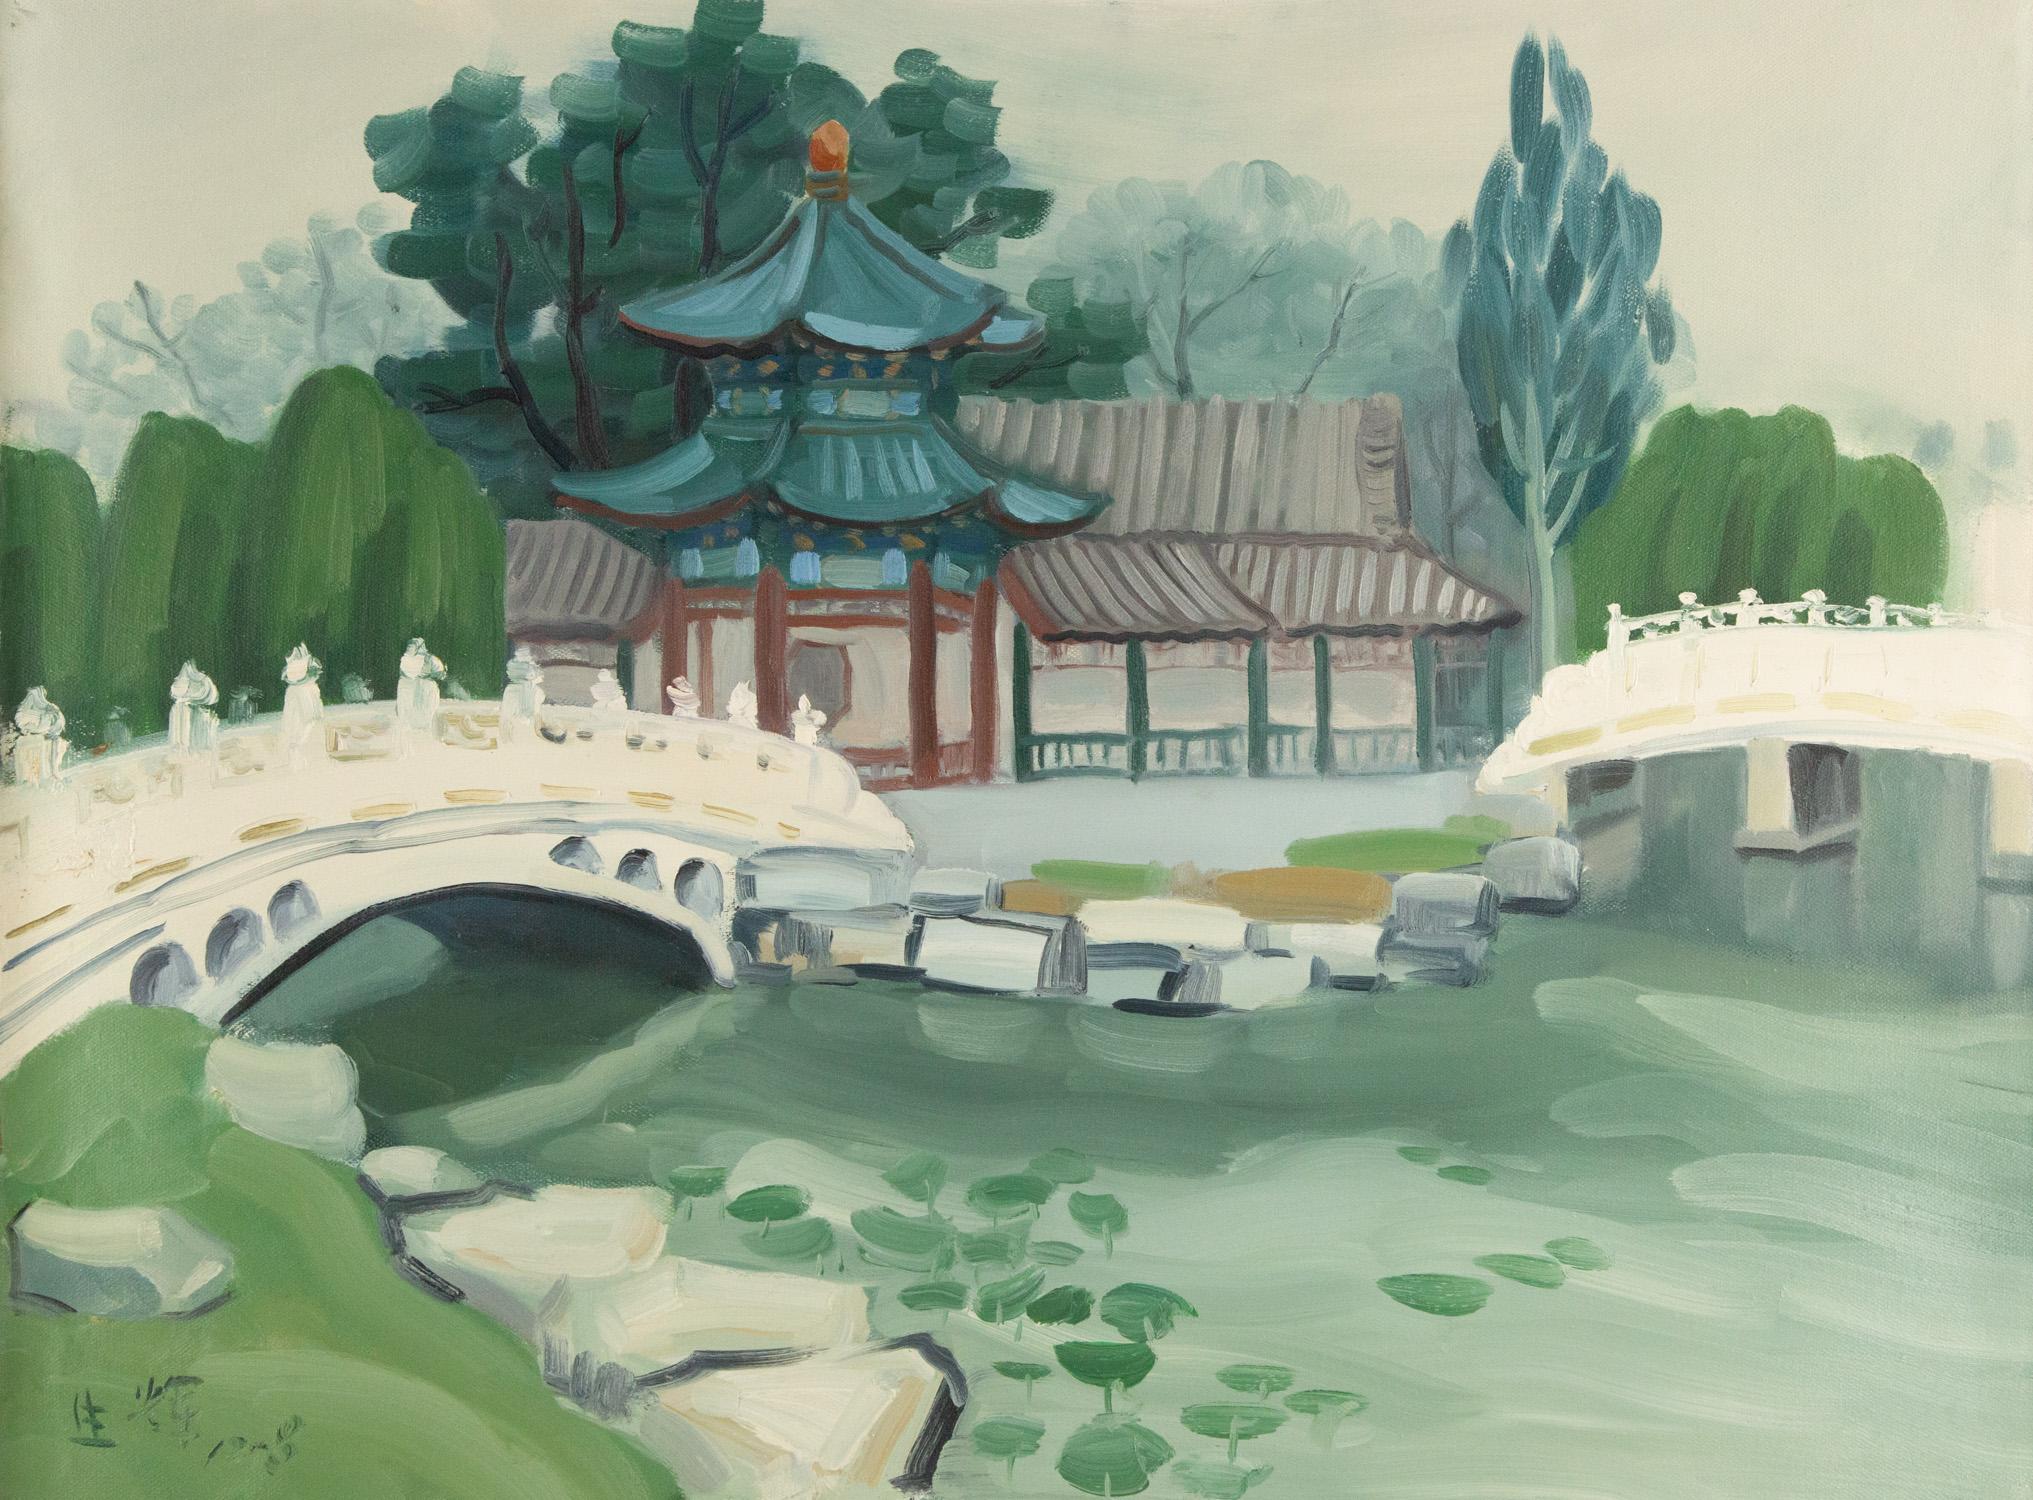 Title: Garden Serenity
Medium: Oil on canvas
Size: 23 x 31 inches
Frame: Framing options available!
Condition: The painting appears to be in excellent condition.
Note: This painting is unstretched
Year: 2012
Artist: Hui Sheng
Signature: